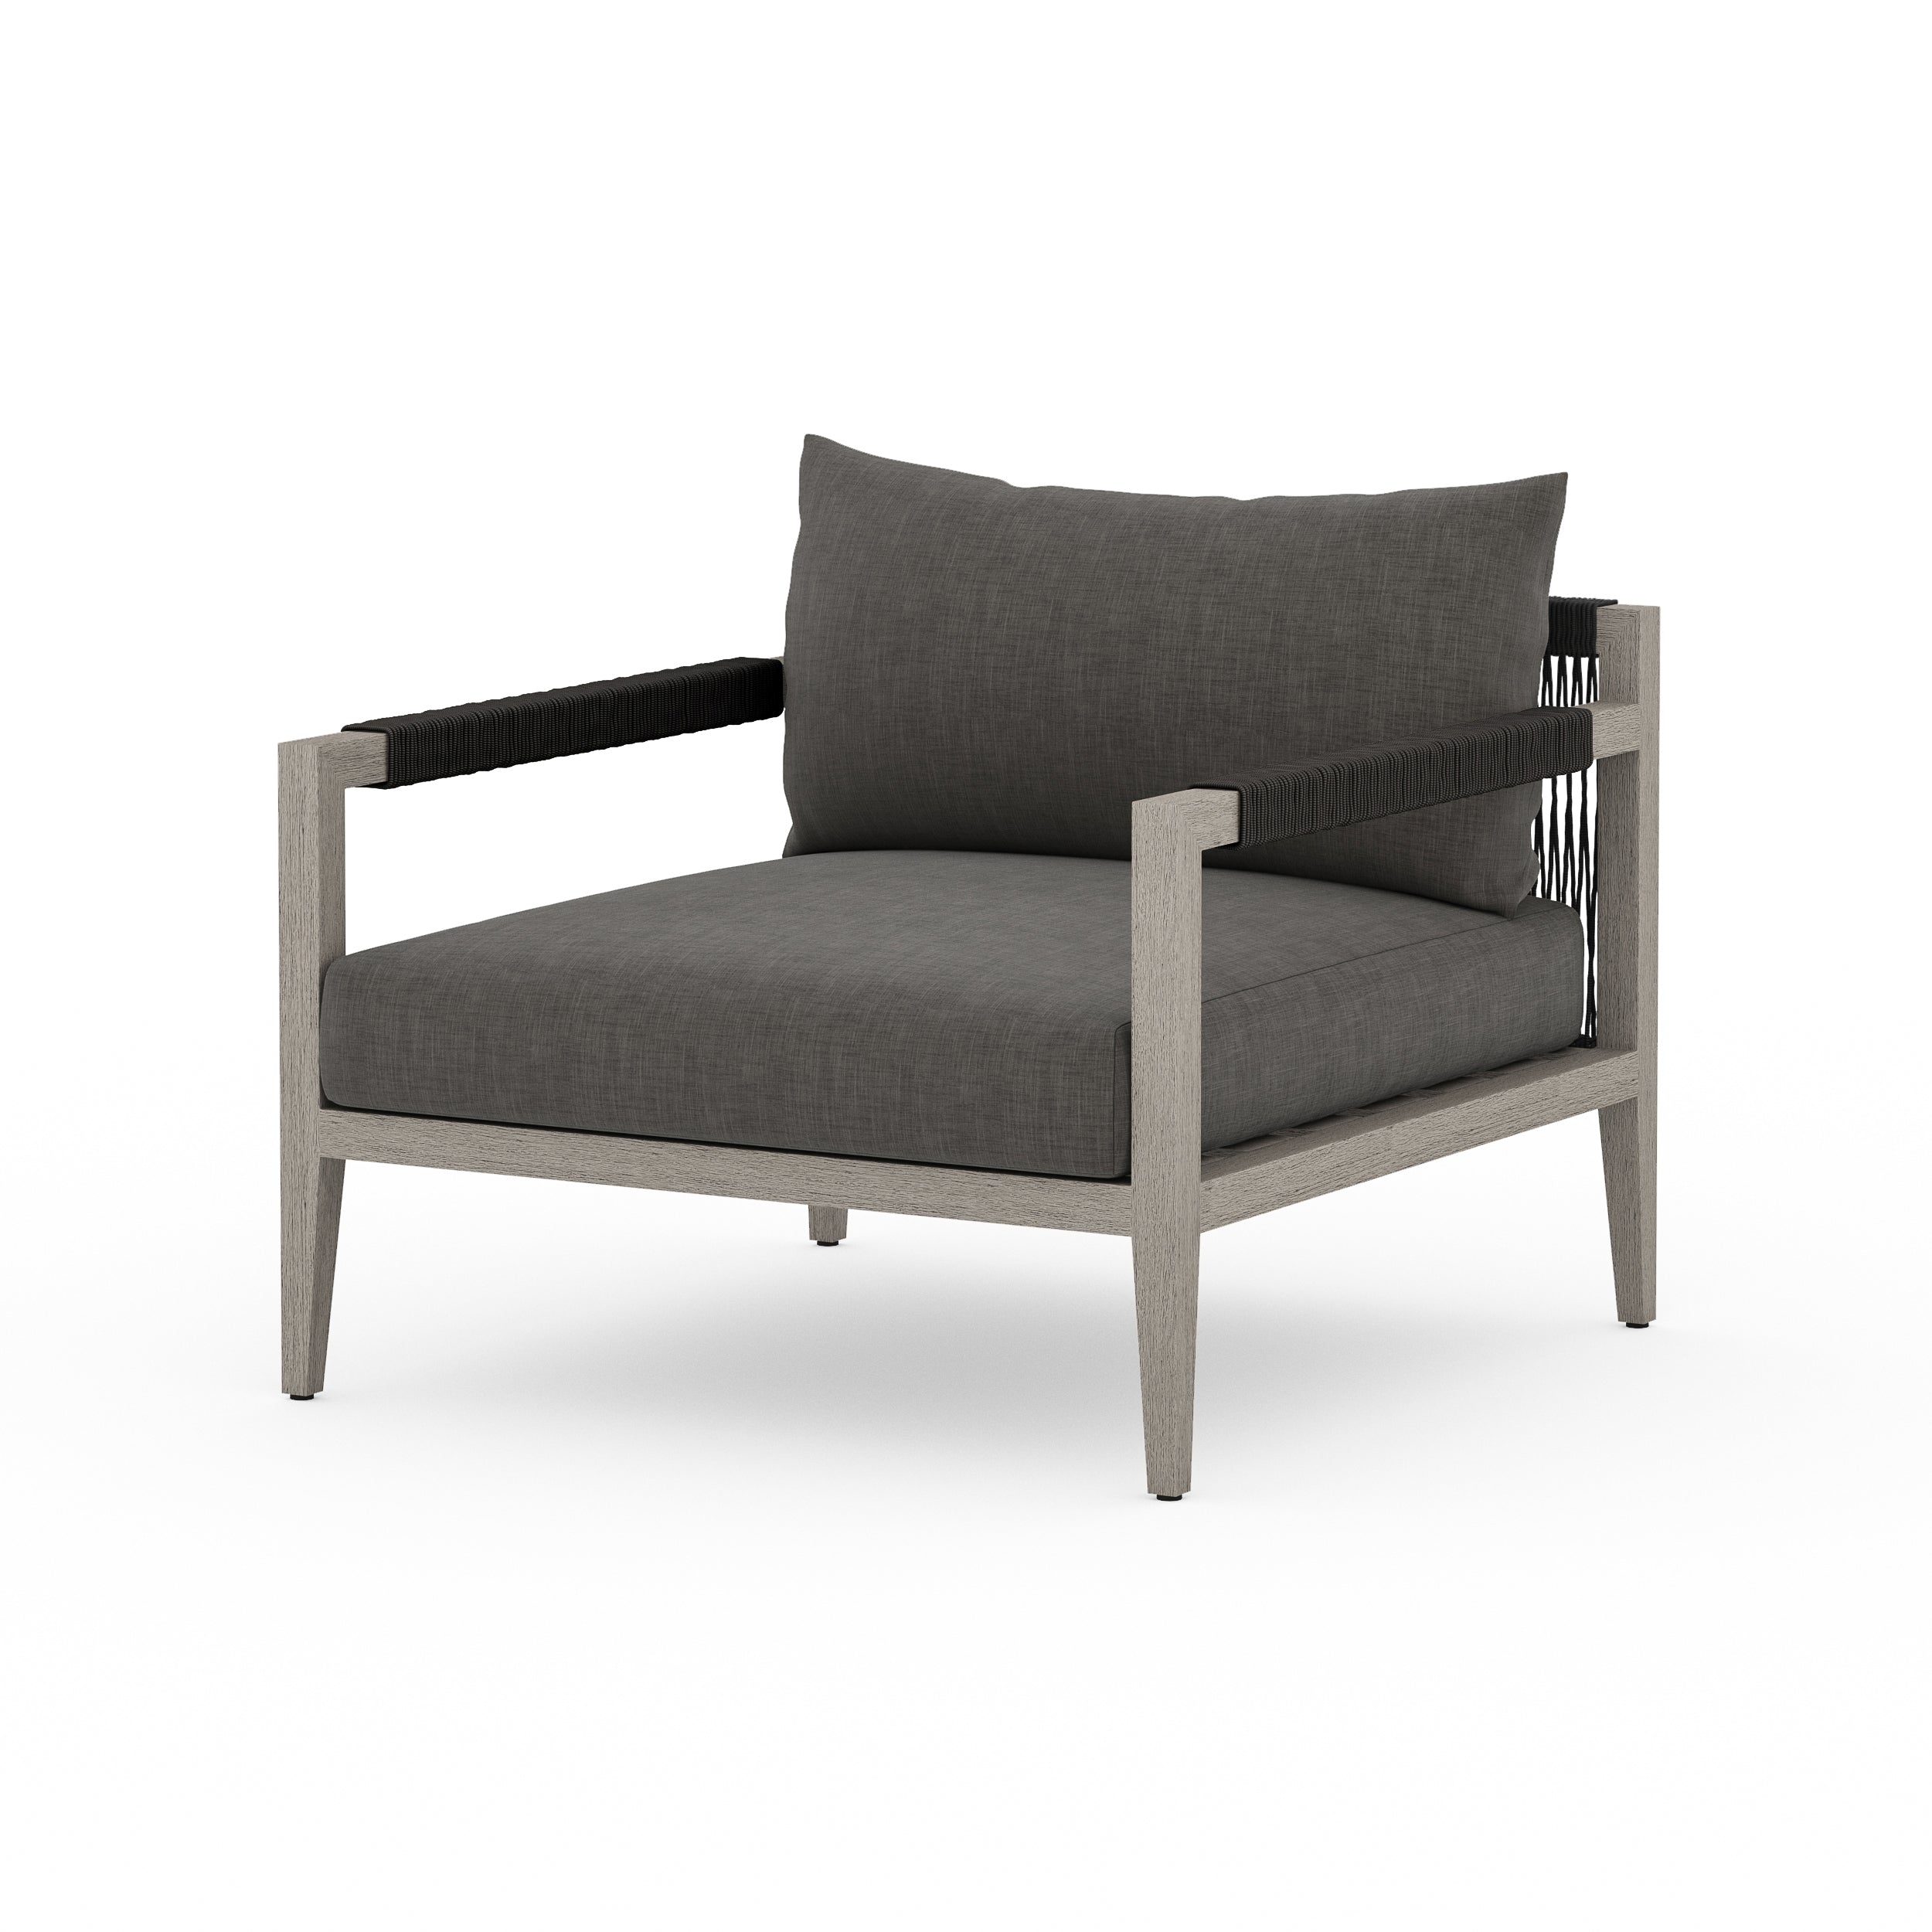 Sherwood Outdoor Chair - Weathered Grey